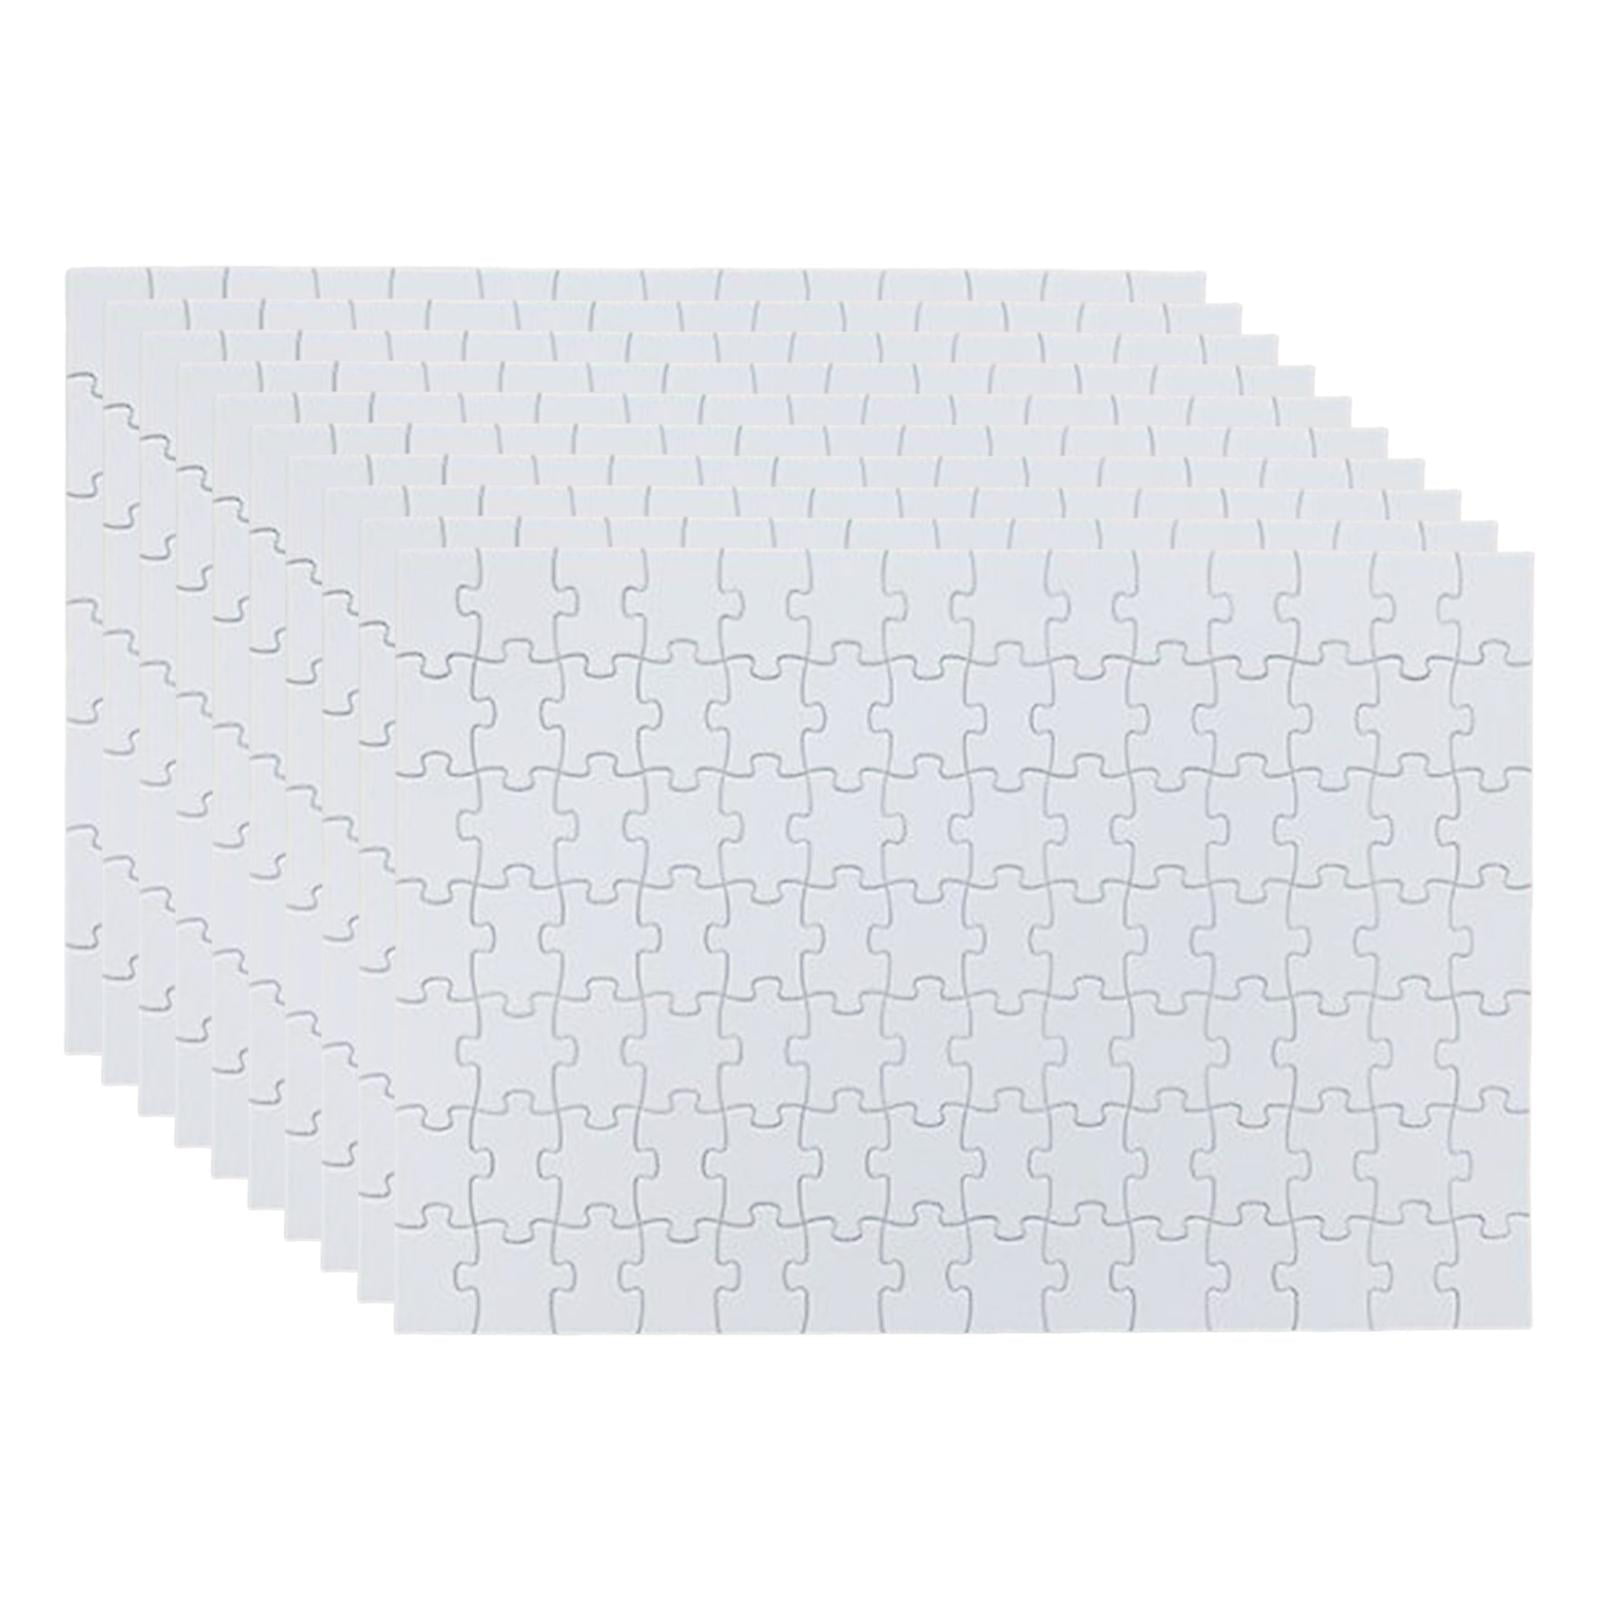 Puzzle Blank Puzzles Diywhite Kids Jigsaw Sublimation Blanks Onwrite Crafts  Pieces Piece Transfer Heat Draw